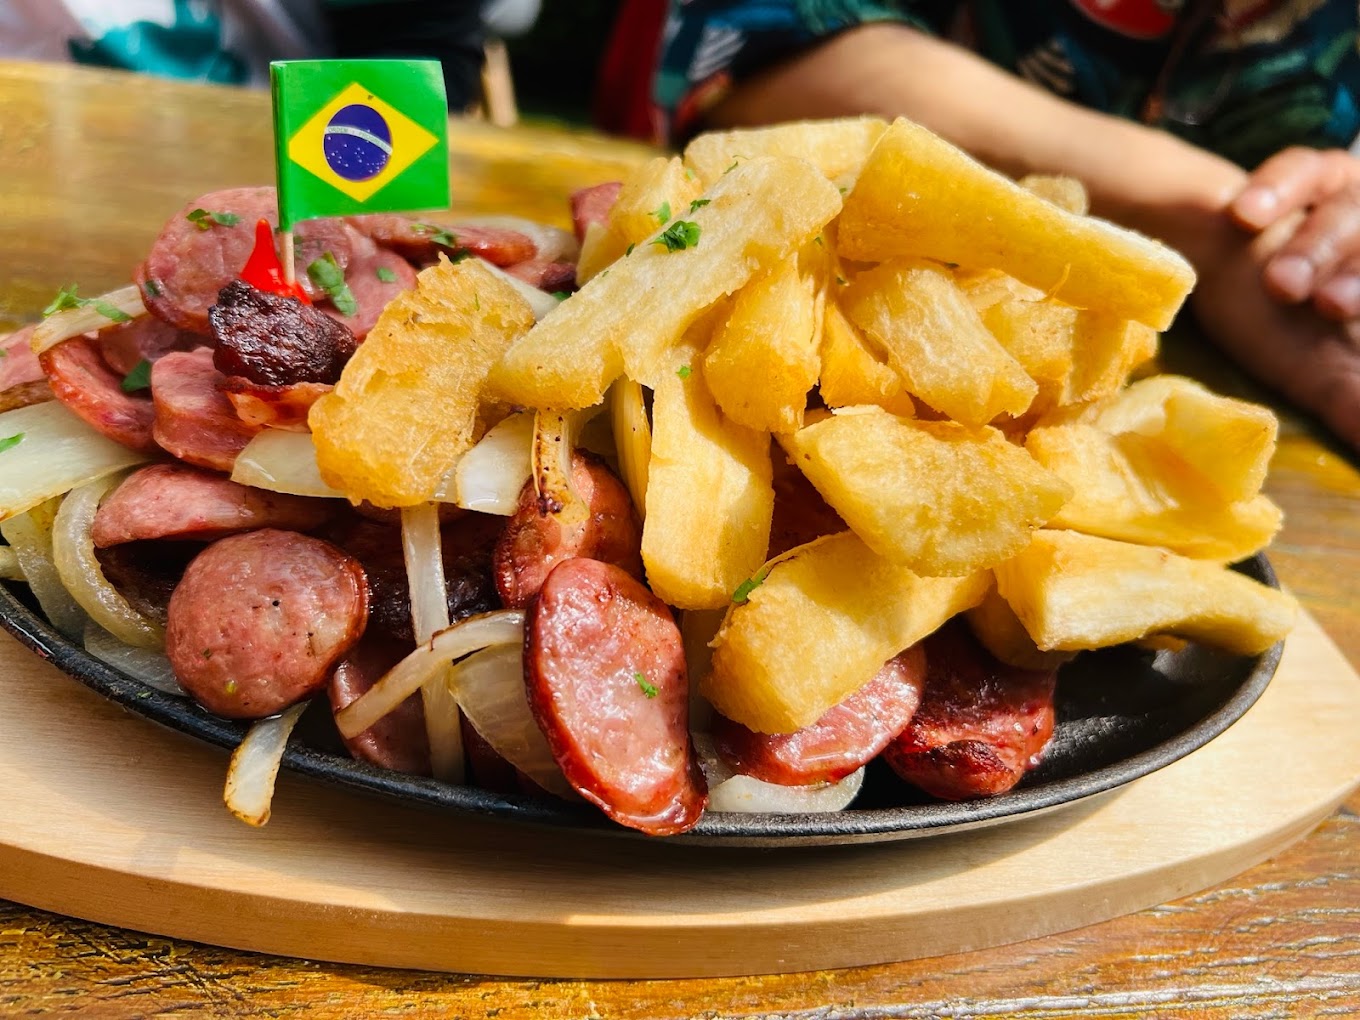 Let's explore the vibrant flavours of Brazil in London! Explore our top picks for the best Brazilian restaurants in the city, from cozy cafes to upscale steakhouses. Indulge in authentic dishes, from feijoada to mouthwatering churrasco, and immerse yourself in the warm hospitality and rich cultural heritage of Brazil.